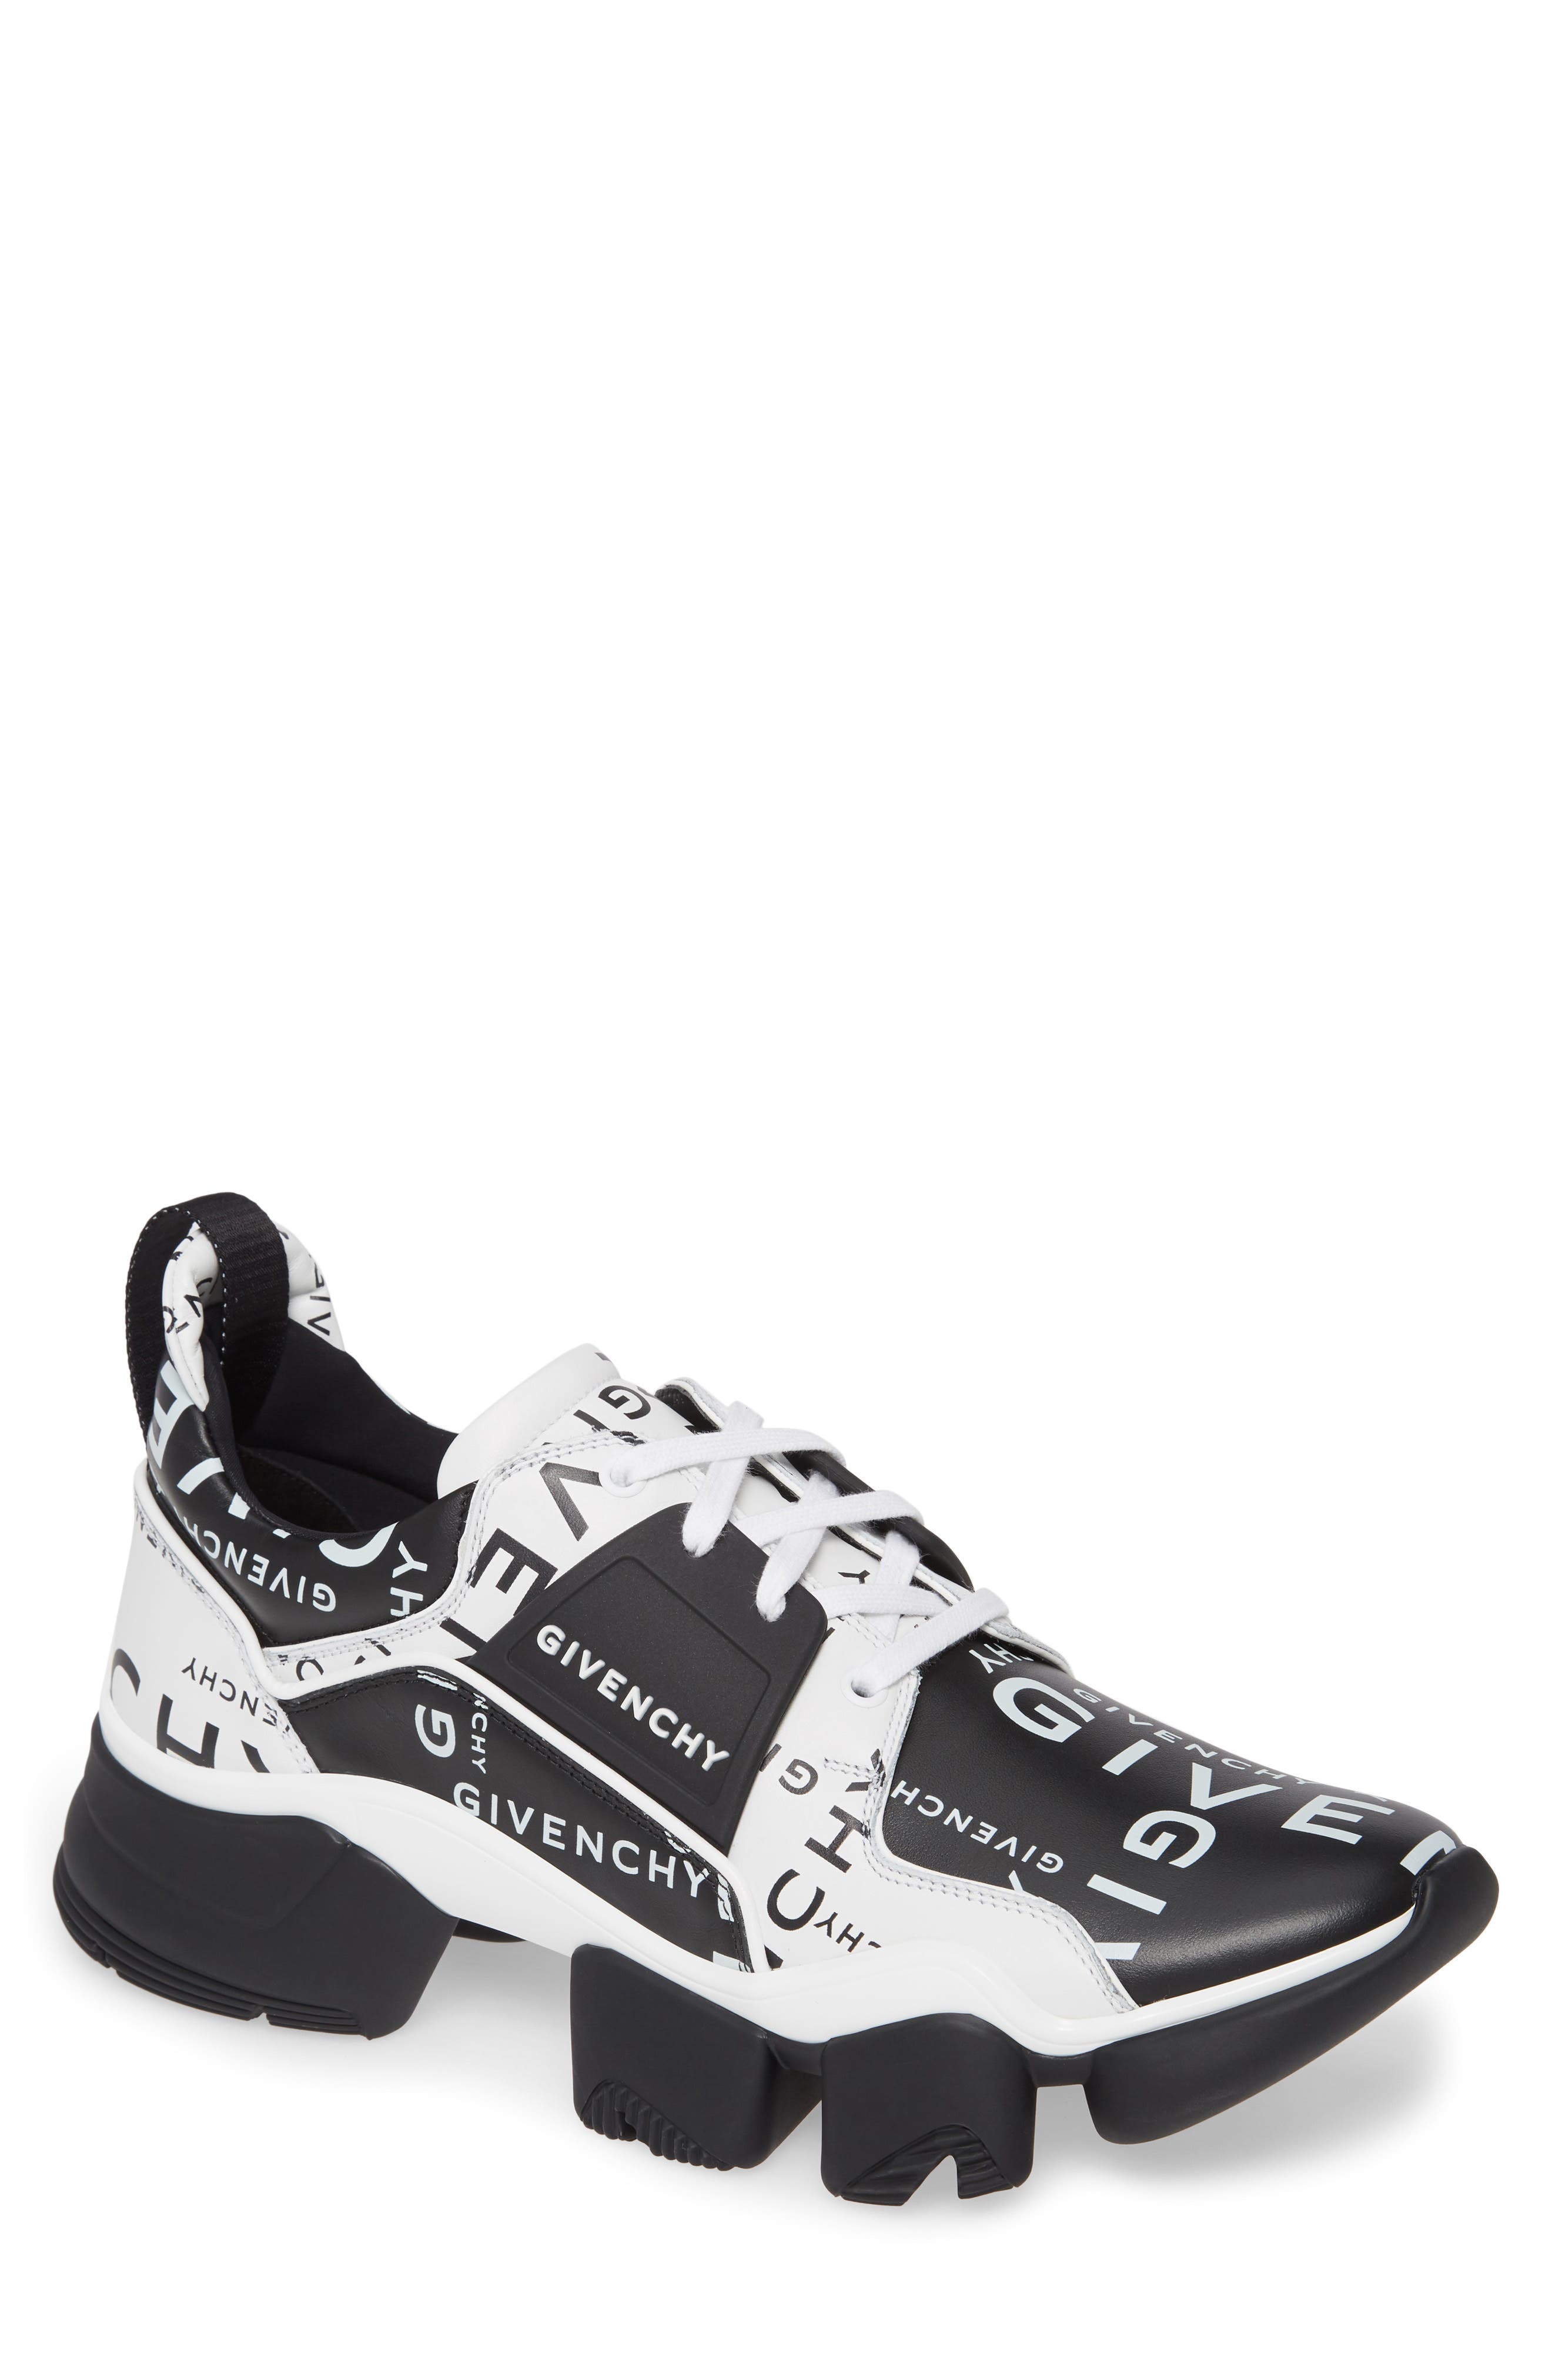 men's givenchy sneakers on sale